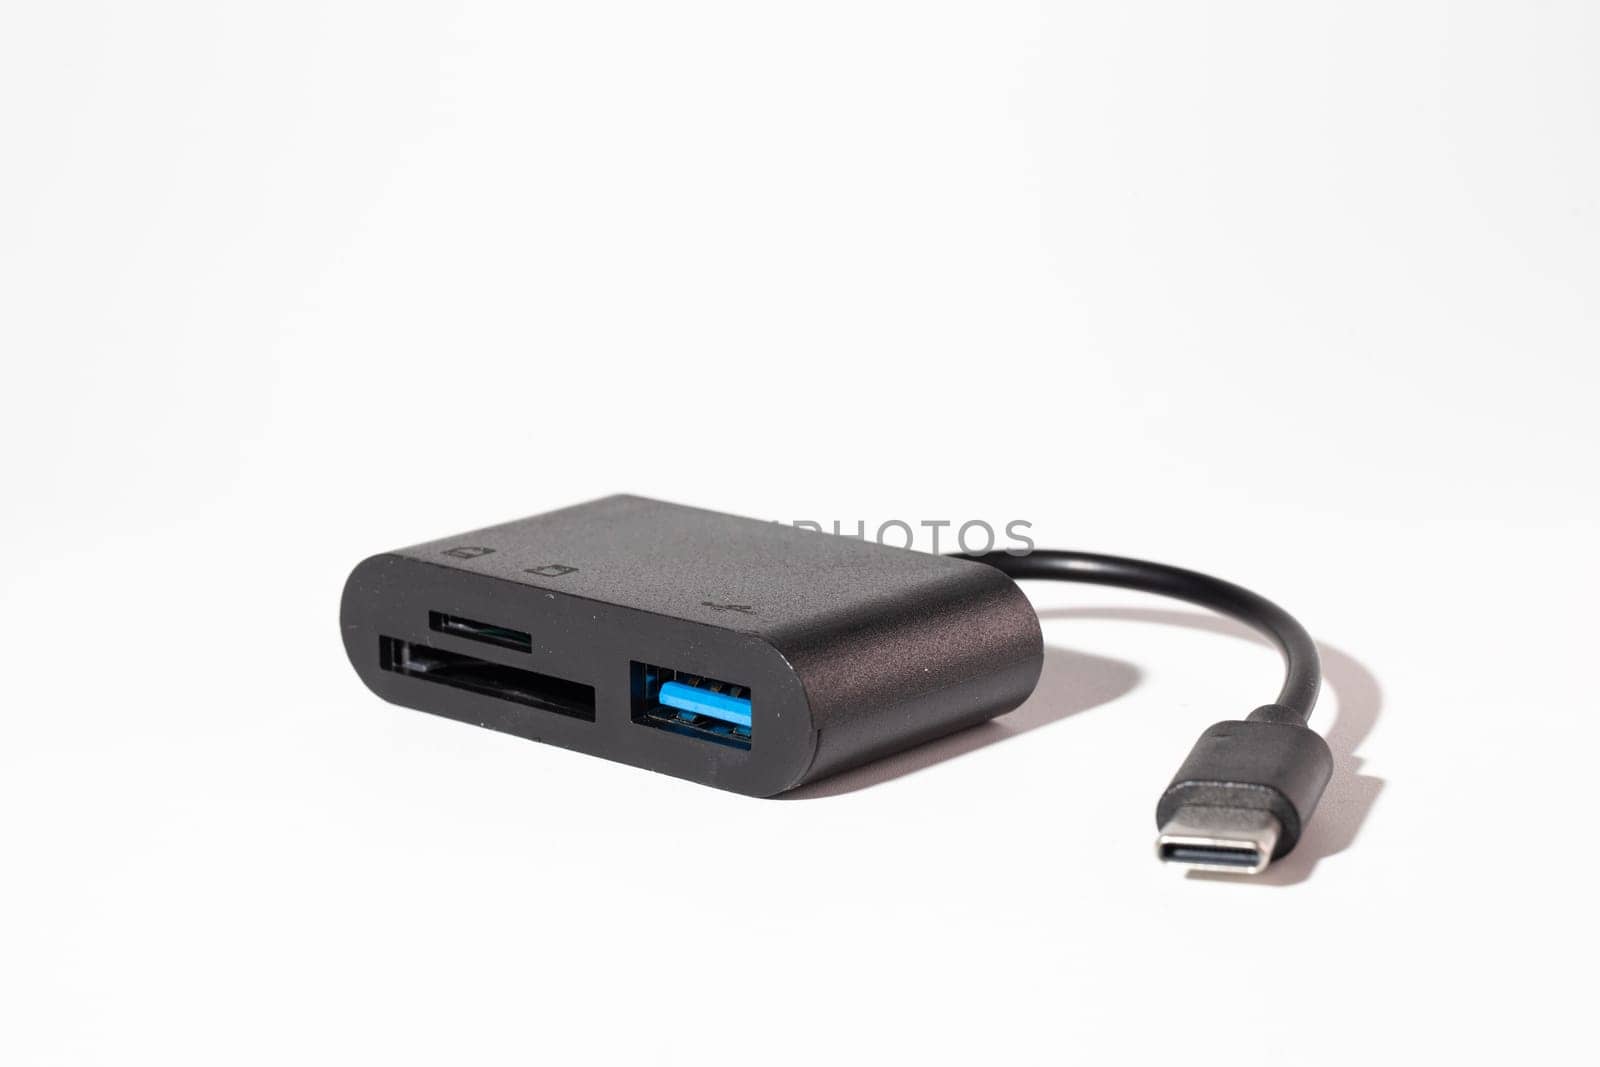 Black USB Type-C 3.1 multi-card reader adapter with short cable for data transfer, isolated on white background. Ideal for tech setups.